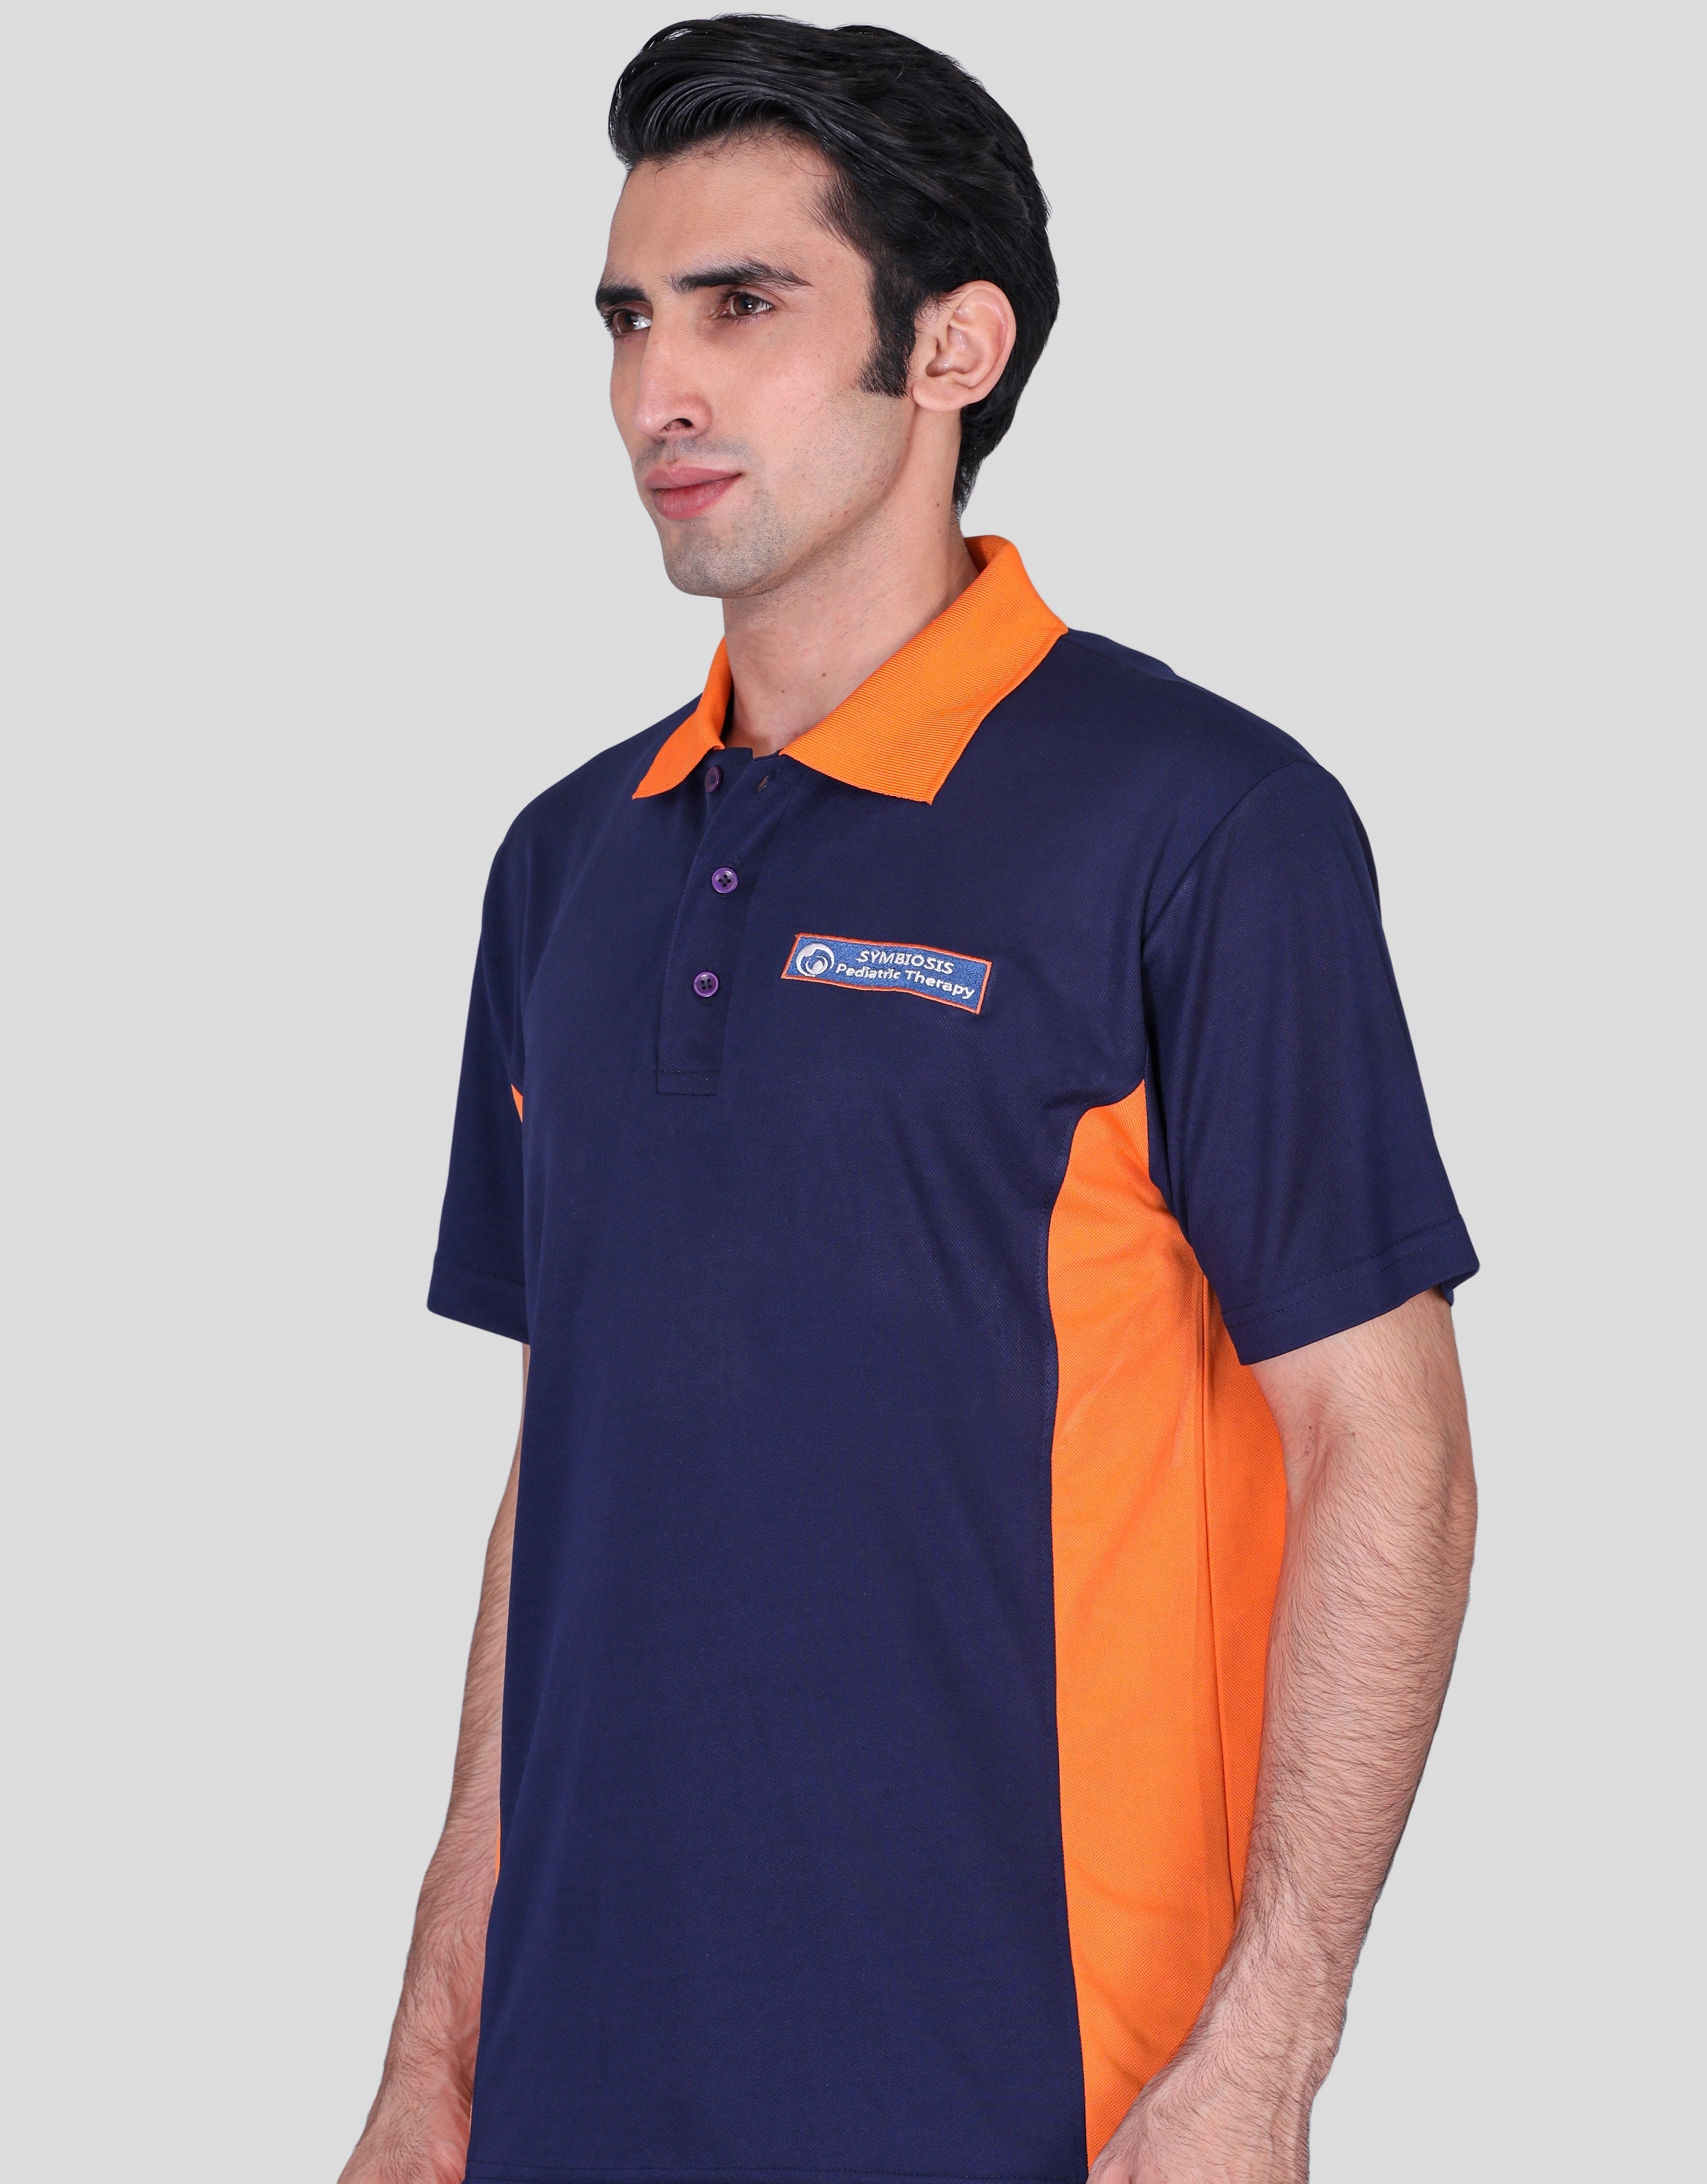 Symbiosis navy blue dry fits t-shirts with company logo